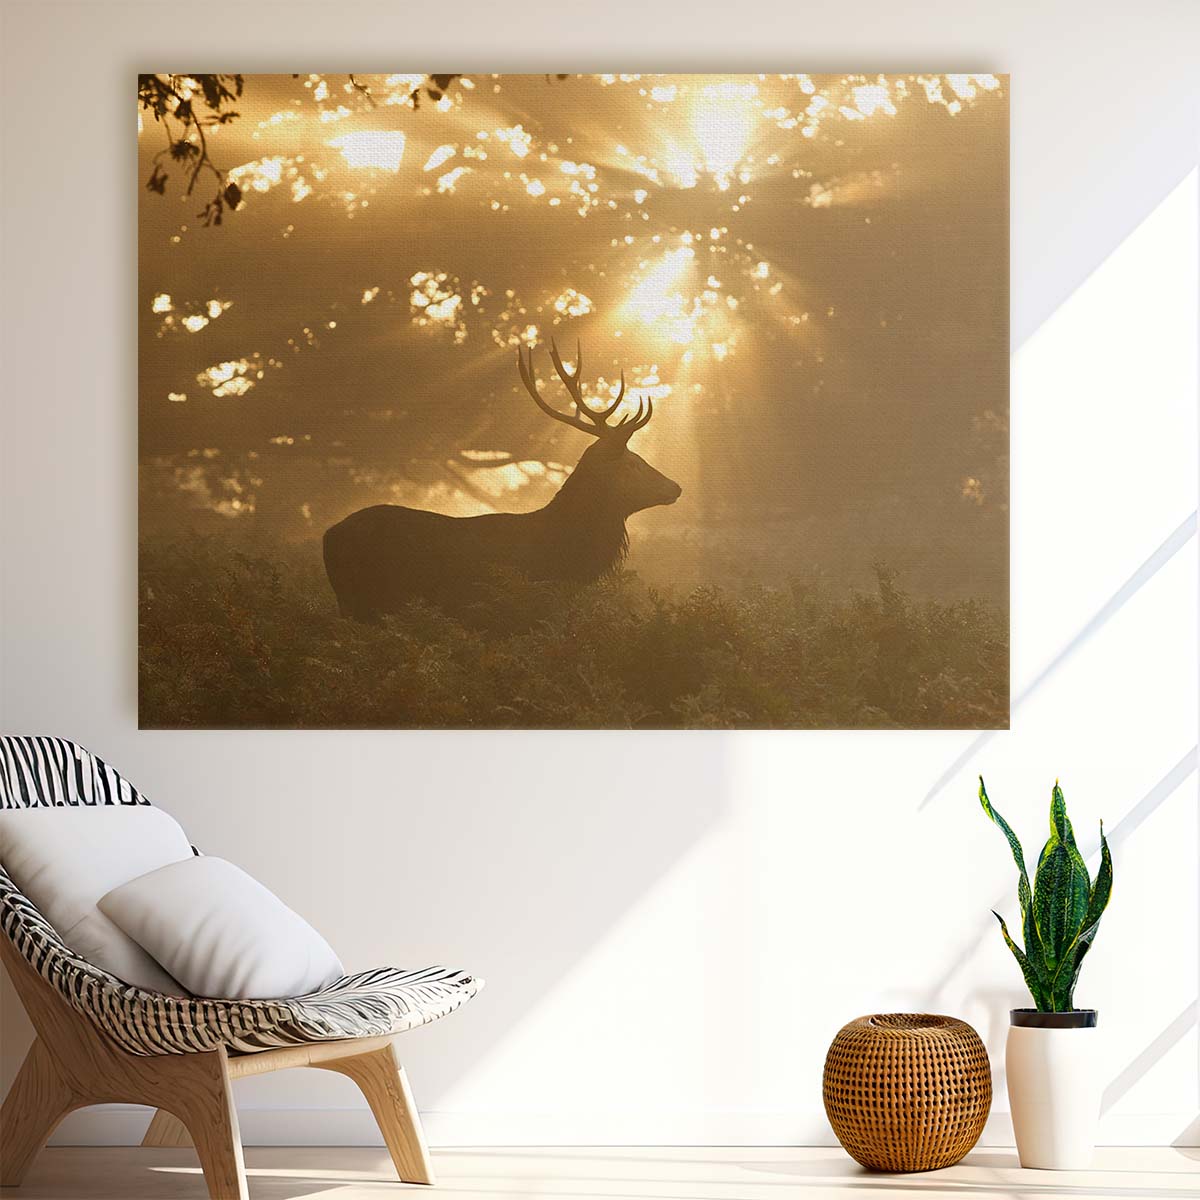 Majestic Sunrise & Stag Silhouette Forest Wall Art by Luxuriance Designs. Made in USA.